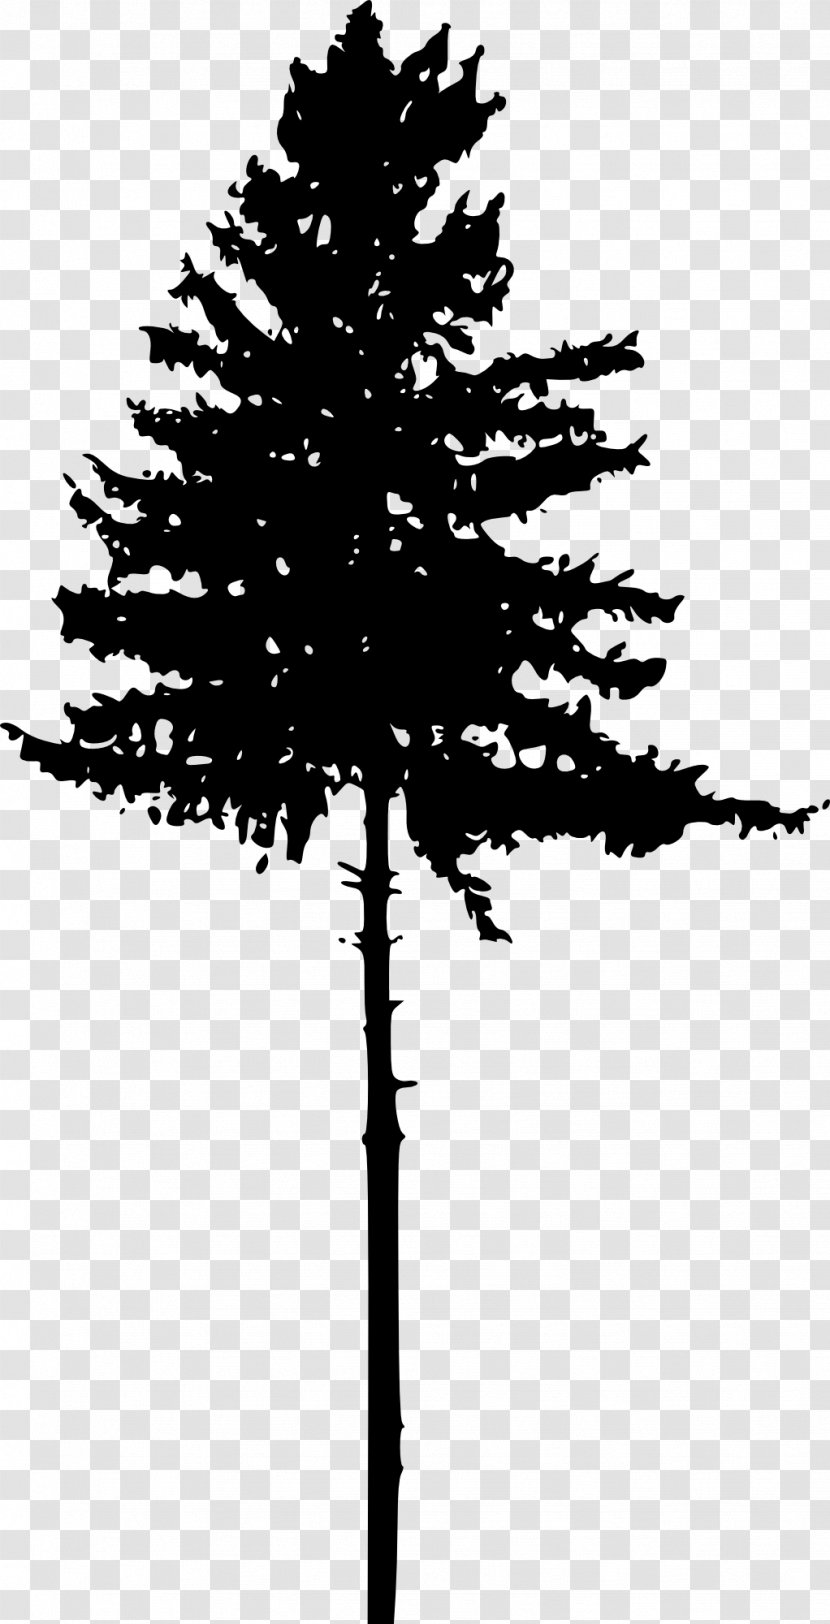 Tree Pine Silhouette Clip Art - Black And White Transparent PNG